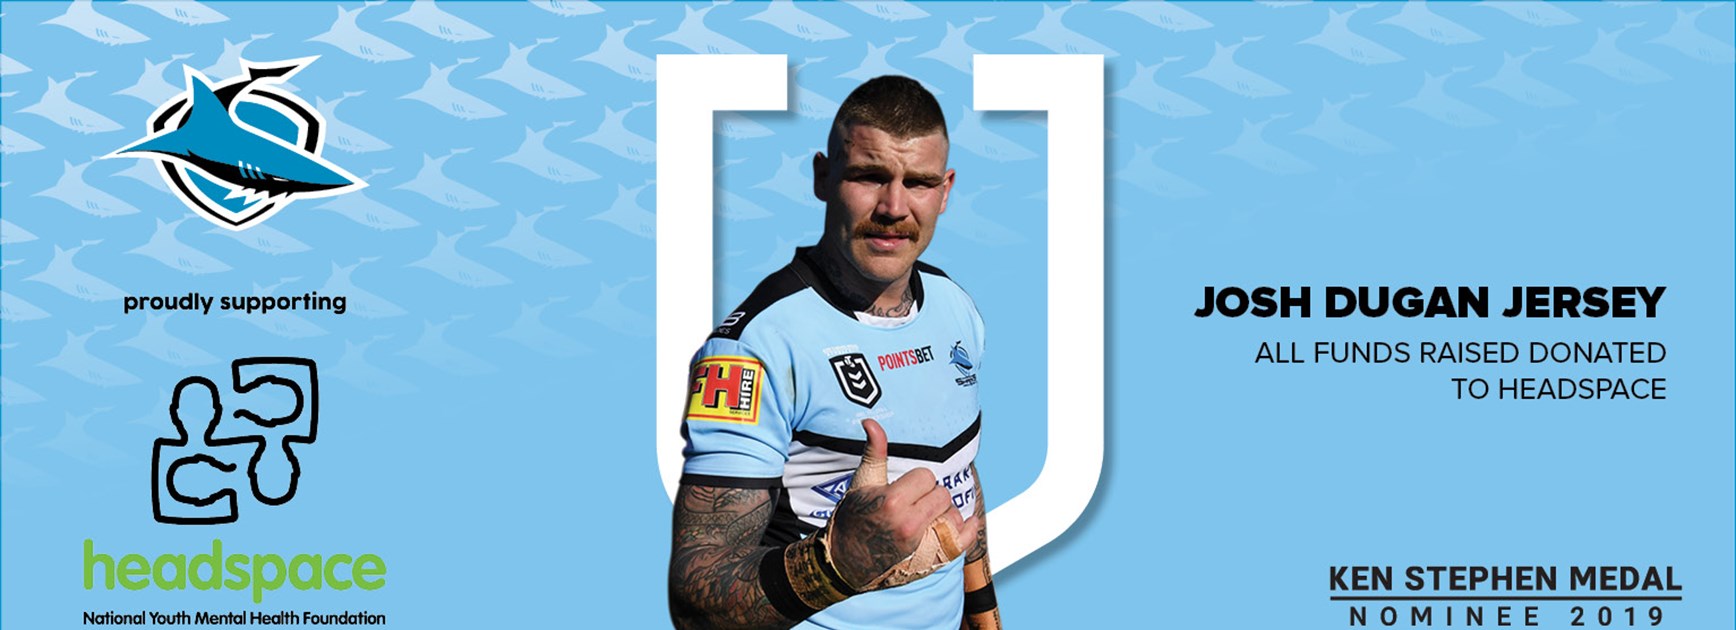 Dugan jersey auction – Supporting headspace